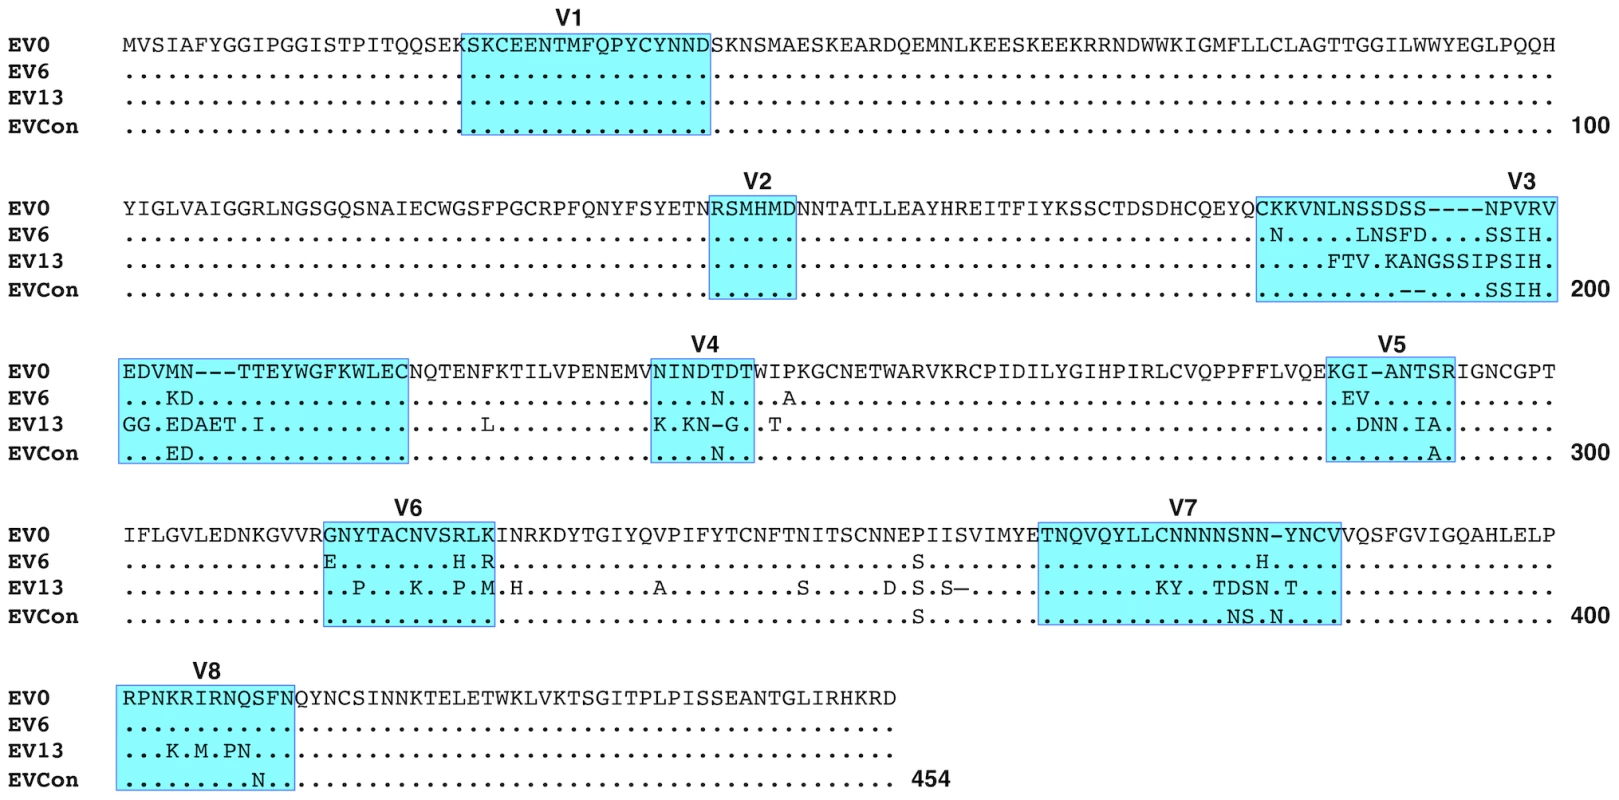 Comparison of deduced amino acid gp90 variable region sequences from EIAV variant Envs (used in attenuated and challenge strain construction) and ConEnv.